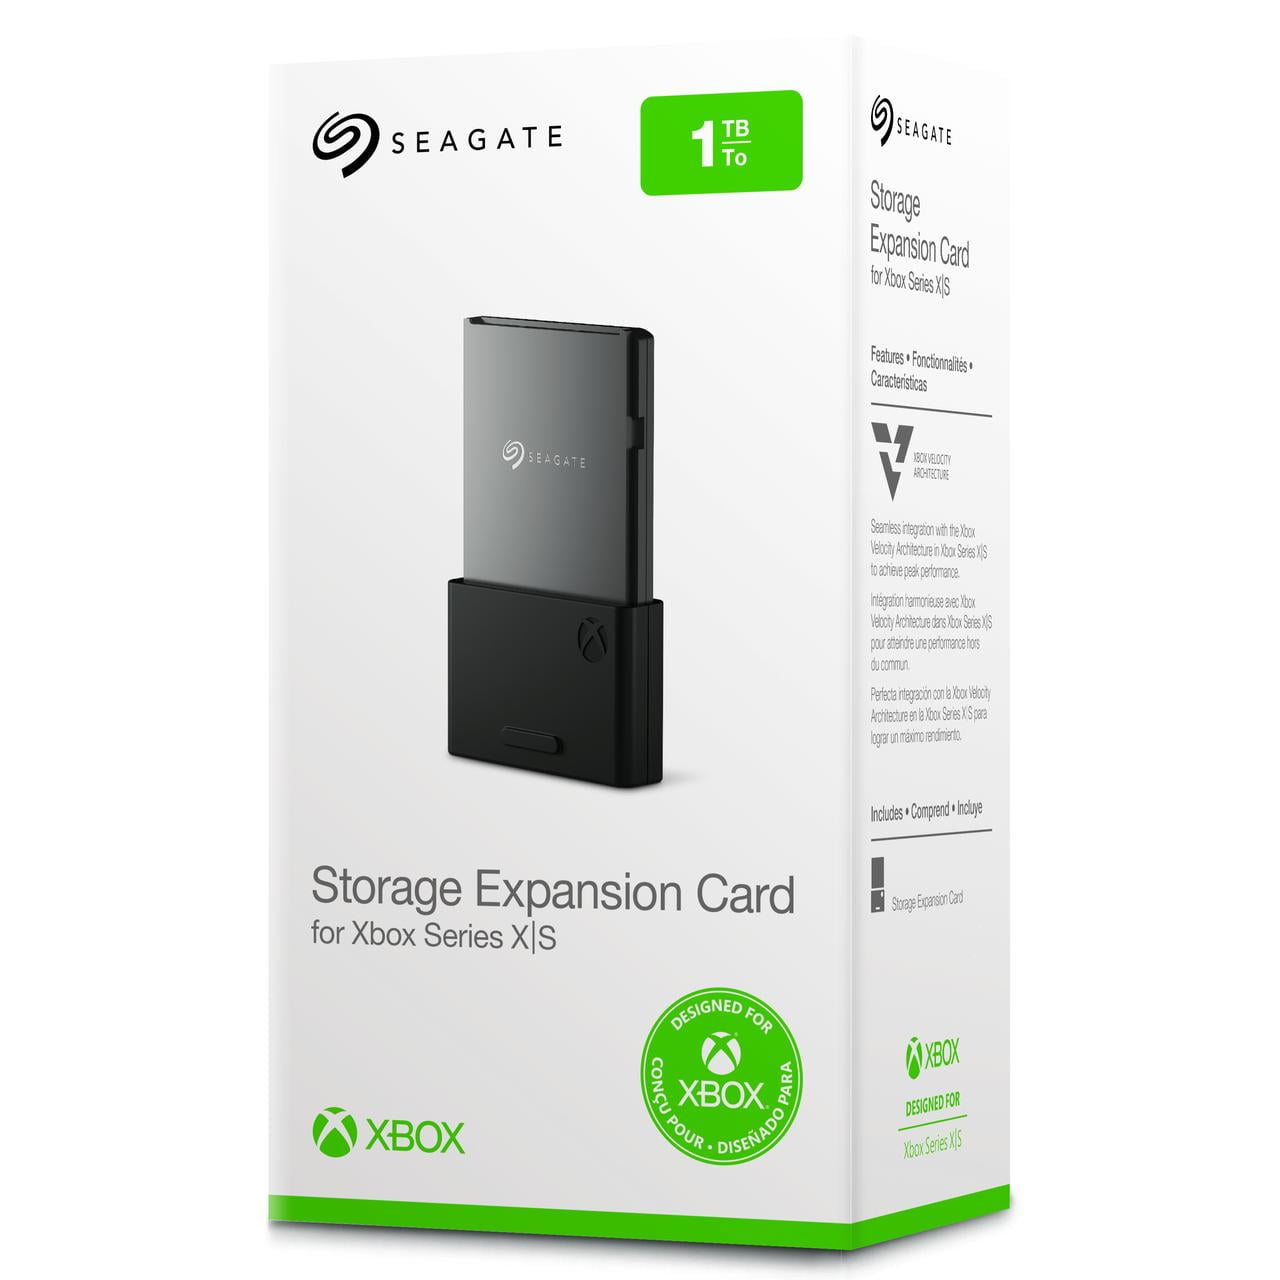 Seagate Expansion Card for Xbox Series X, S review: rapid and spacious  storage